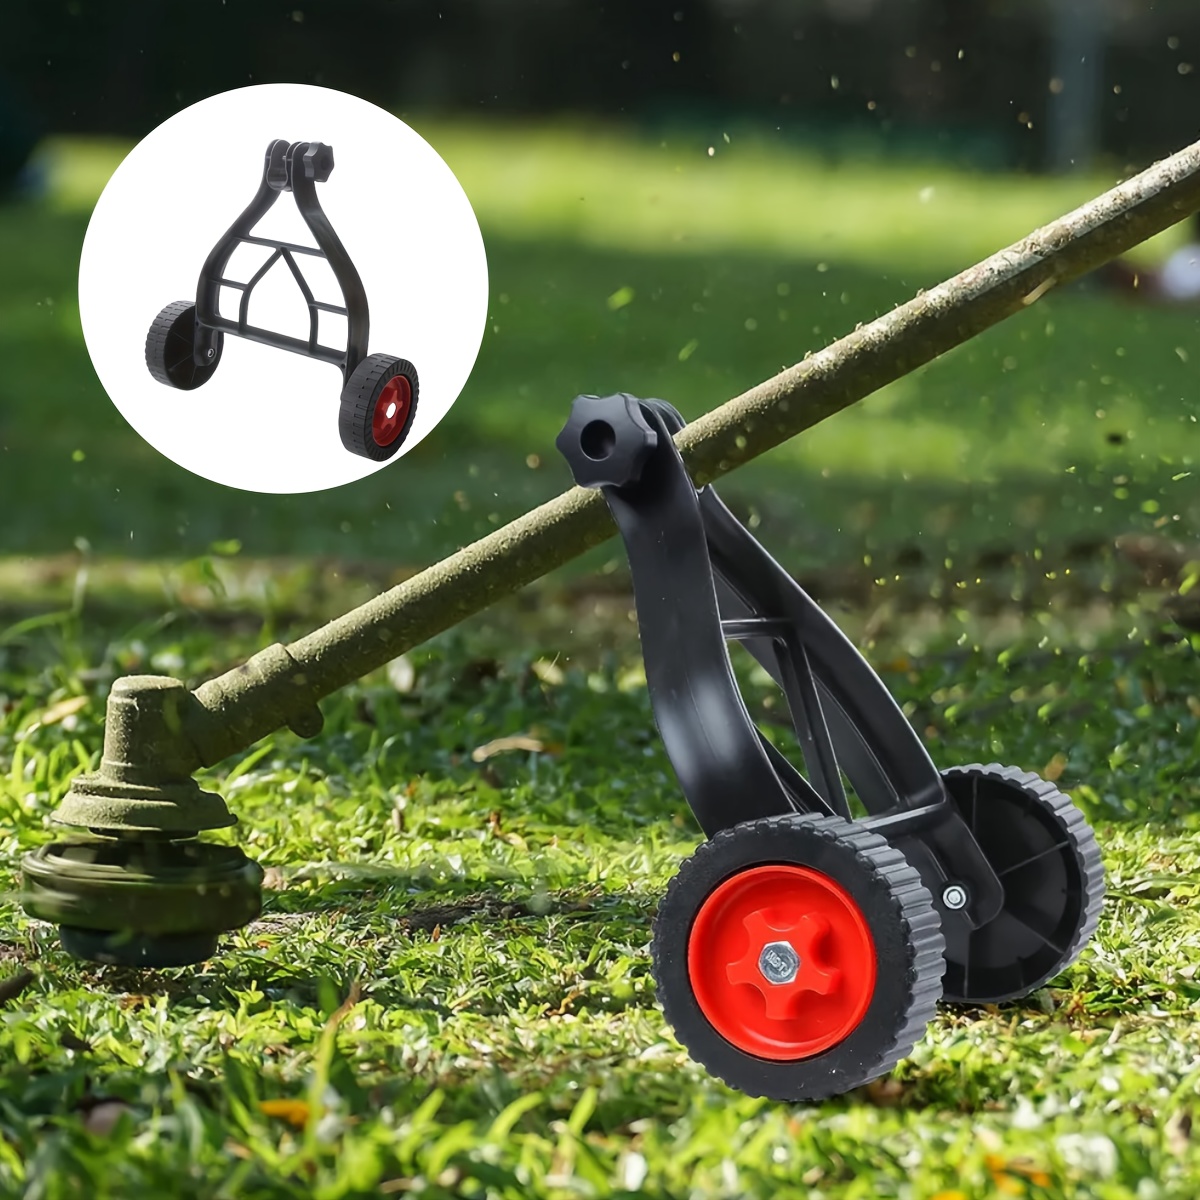 

Lawn Mower Auxiliary Wheel - Fit For Gas-powered & Lithium Electric Trimmers, Portable Grass String Trimmer Accessory For Home Garden Weeding Maintenance - 1pc